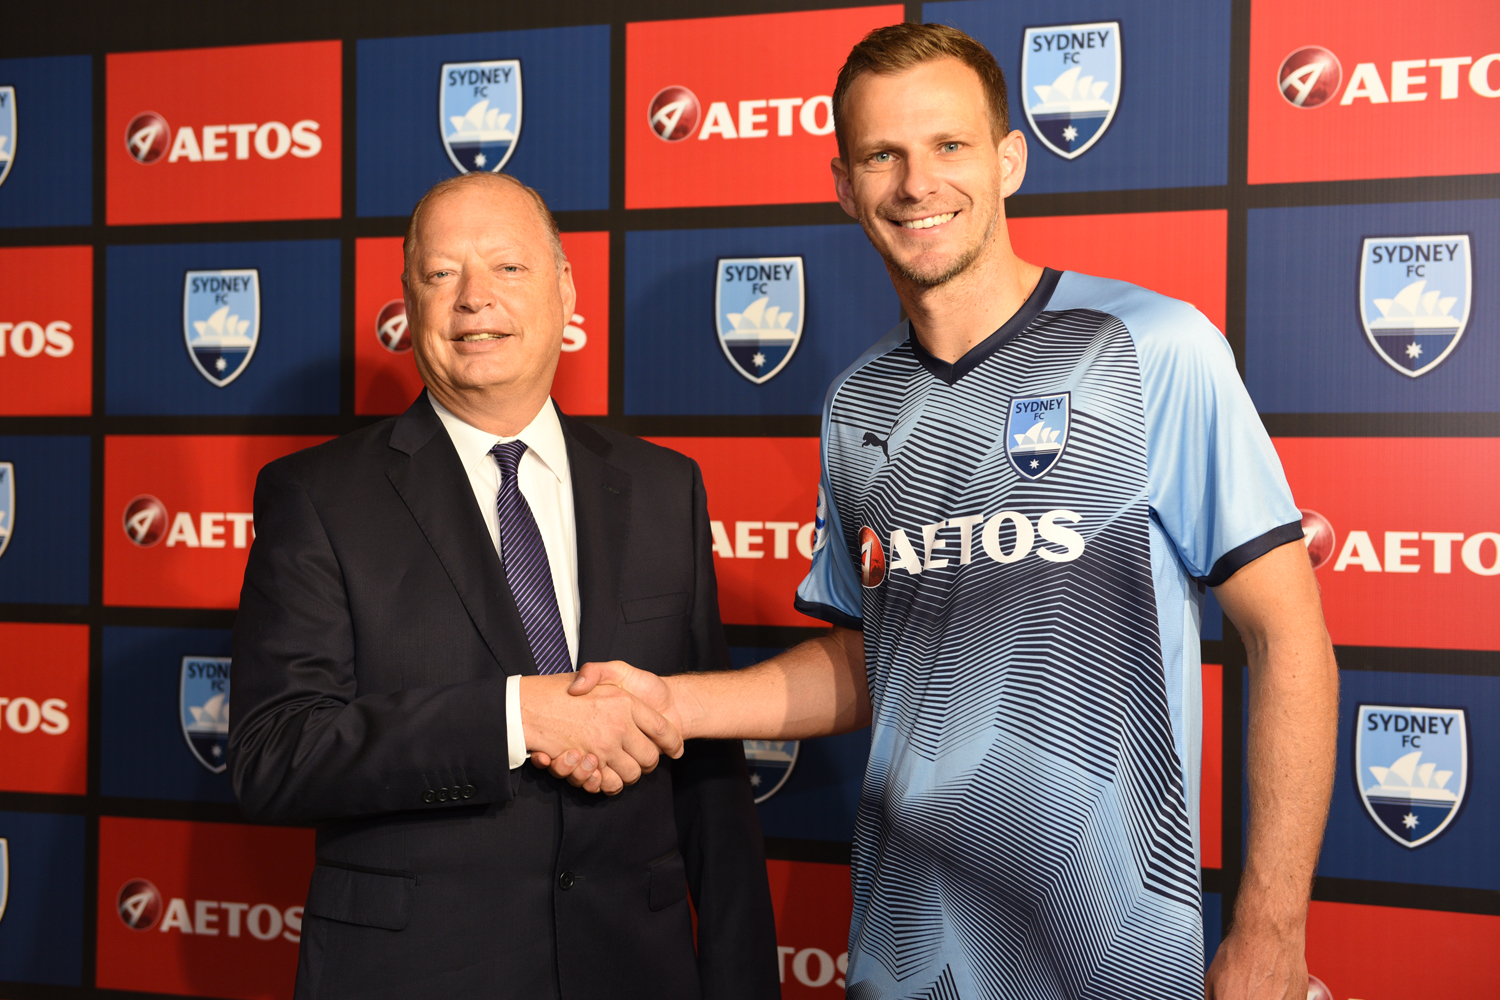 The Sky Blues Vice Captain Alex Wilkinson showed his determination to win the away match with Shanghai SIPG.